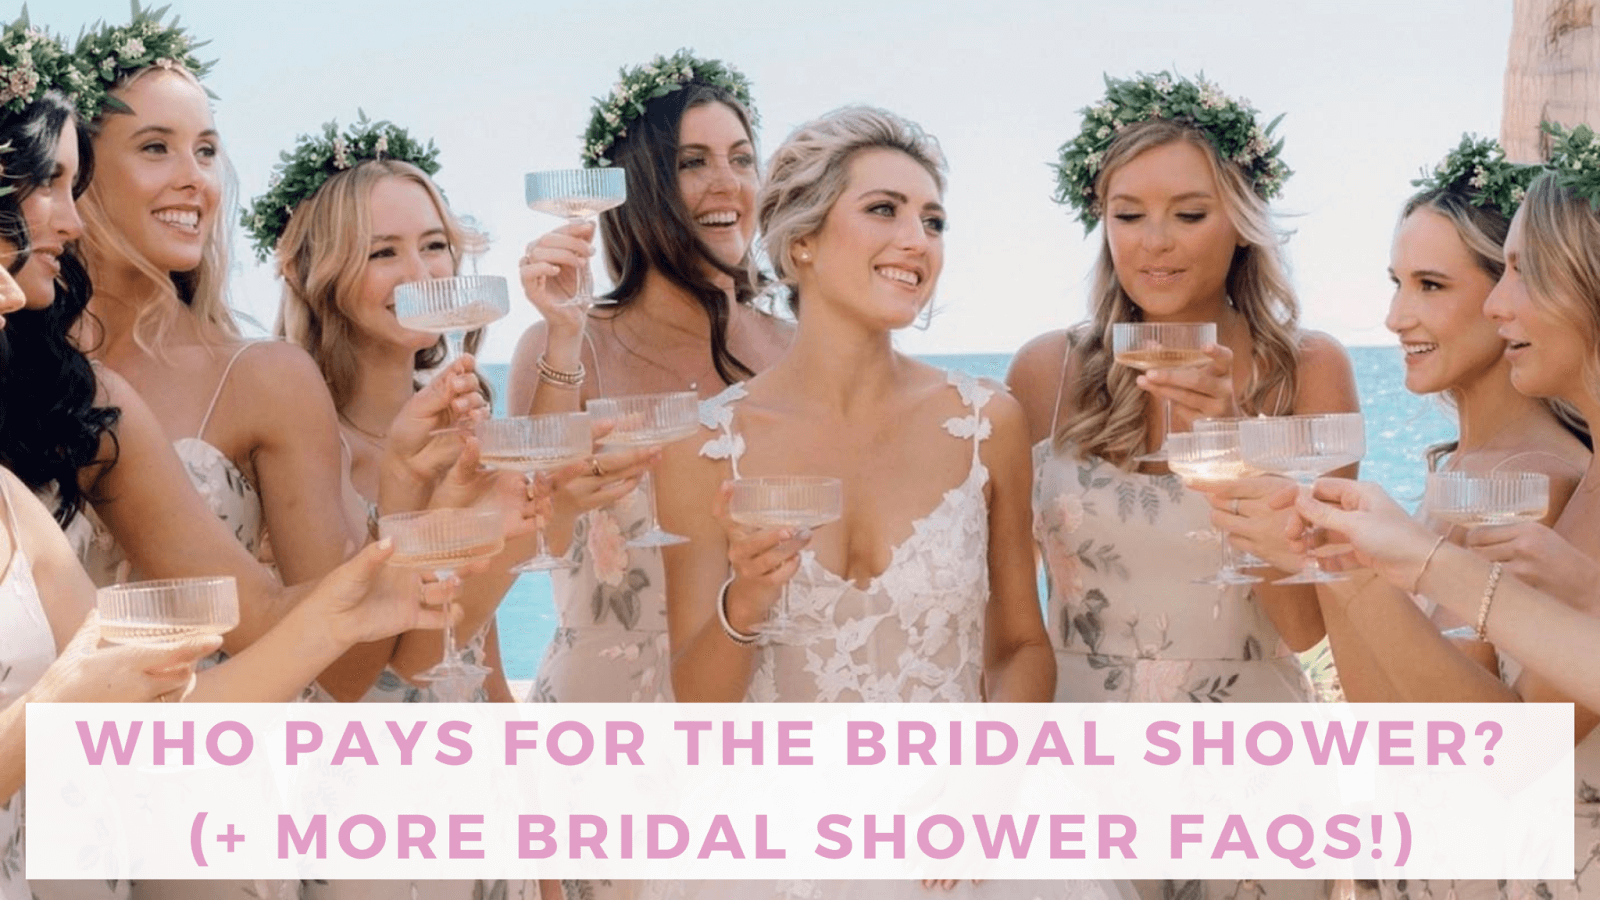 Bridal Shower Versus Bachelorette Party (What's the Difference?)